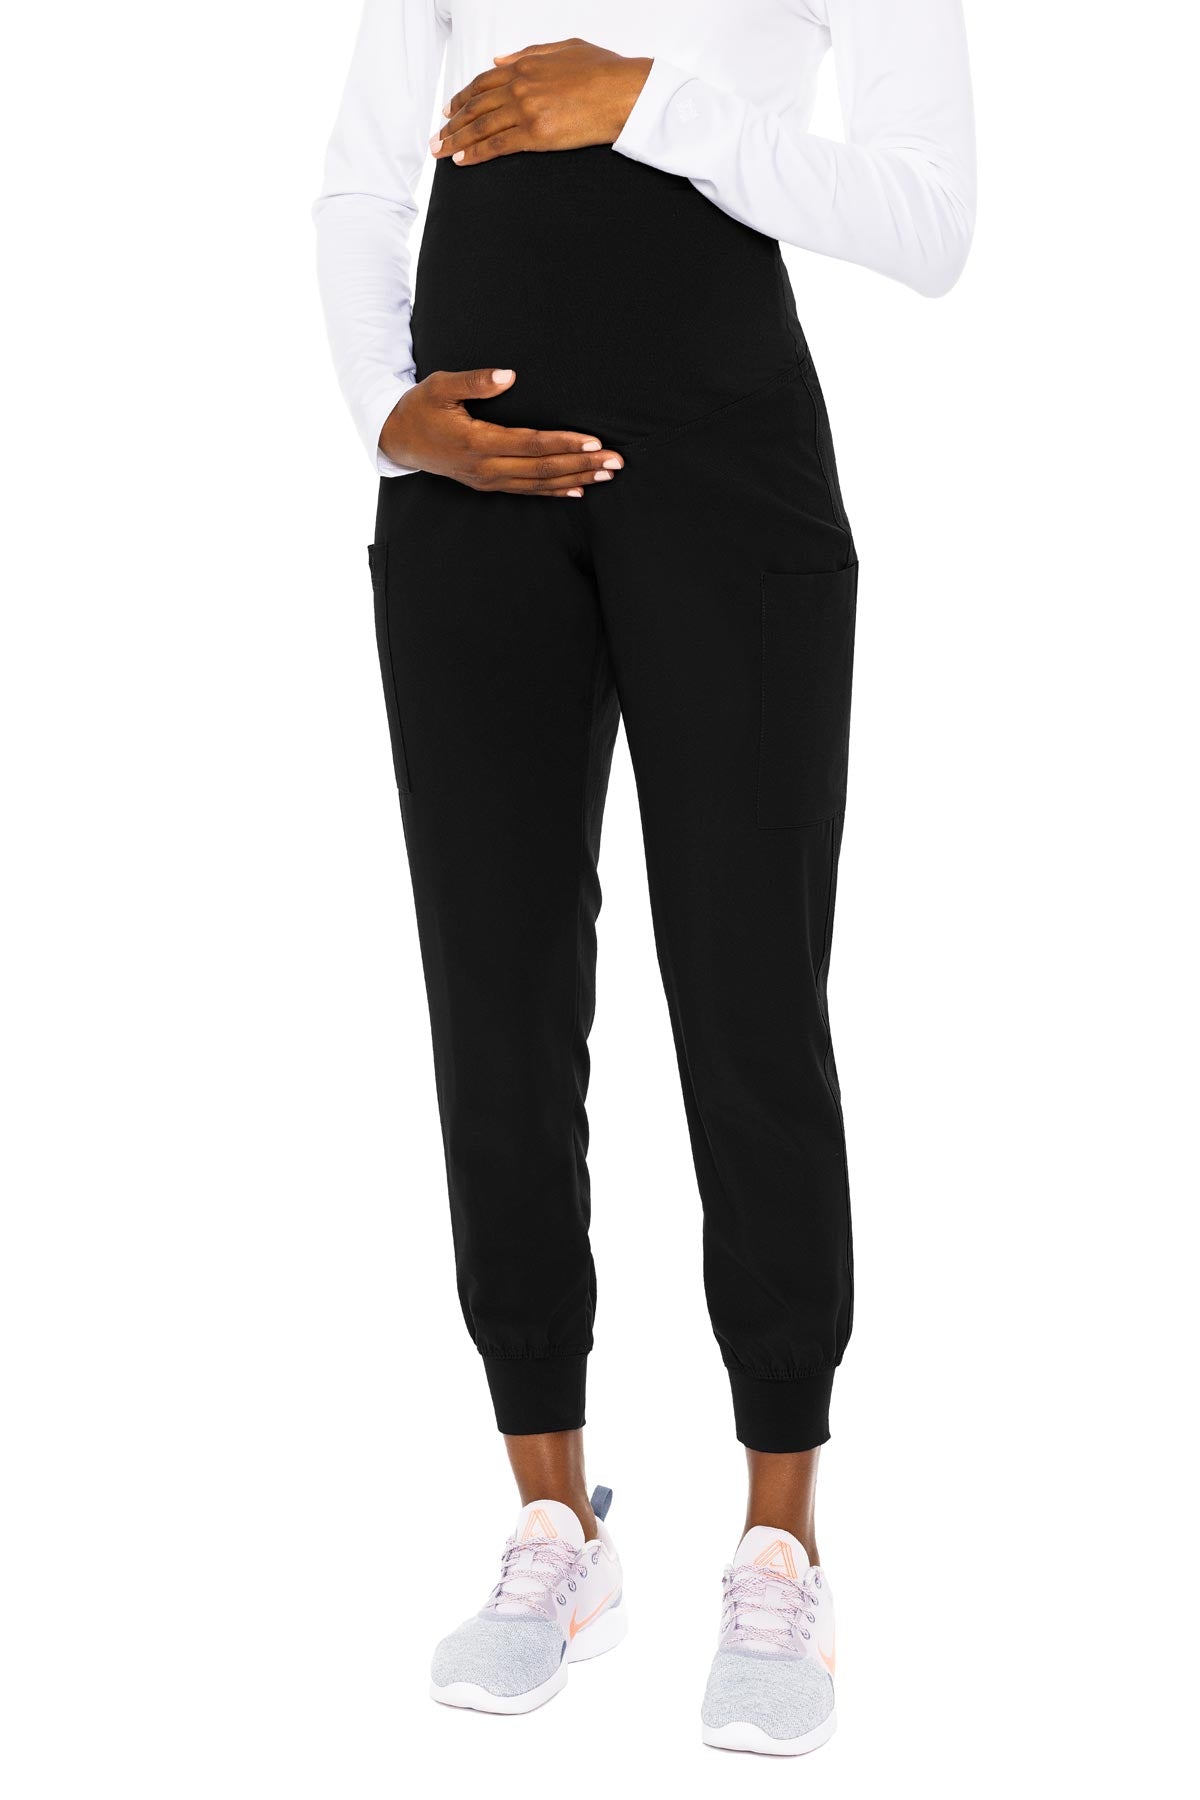 Petite 8729 Med Couture Activate Maternity Women's Maternity Jogger